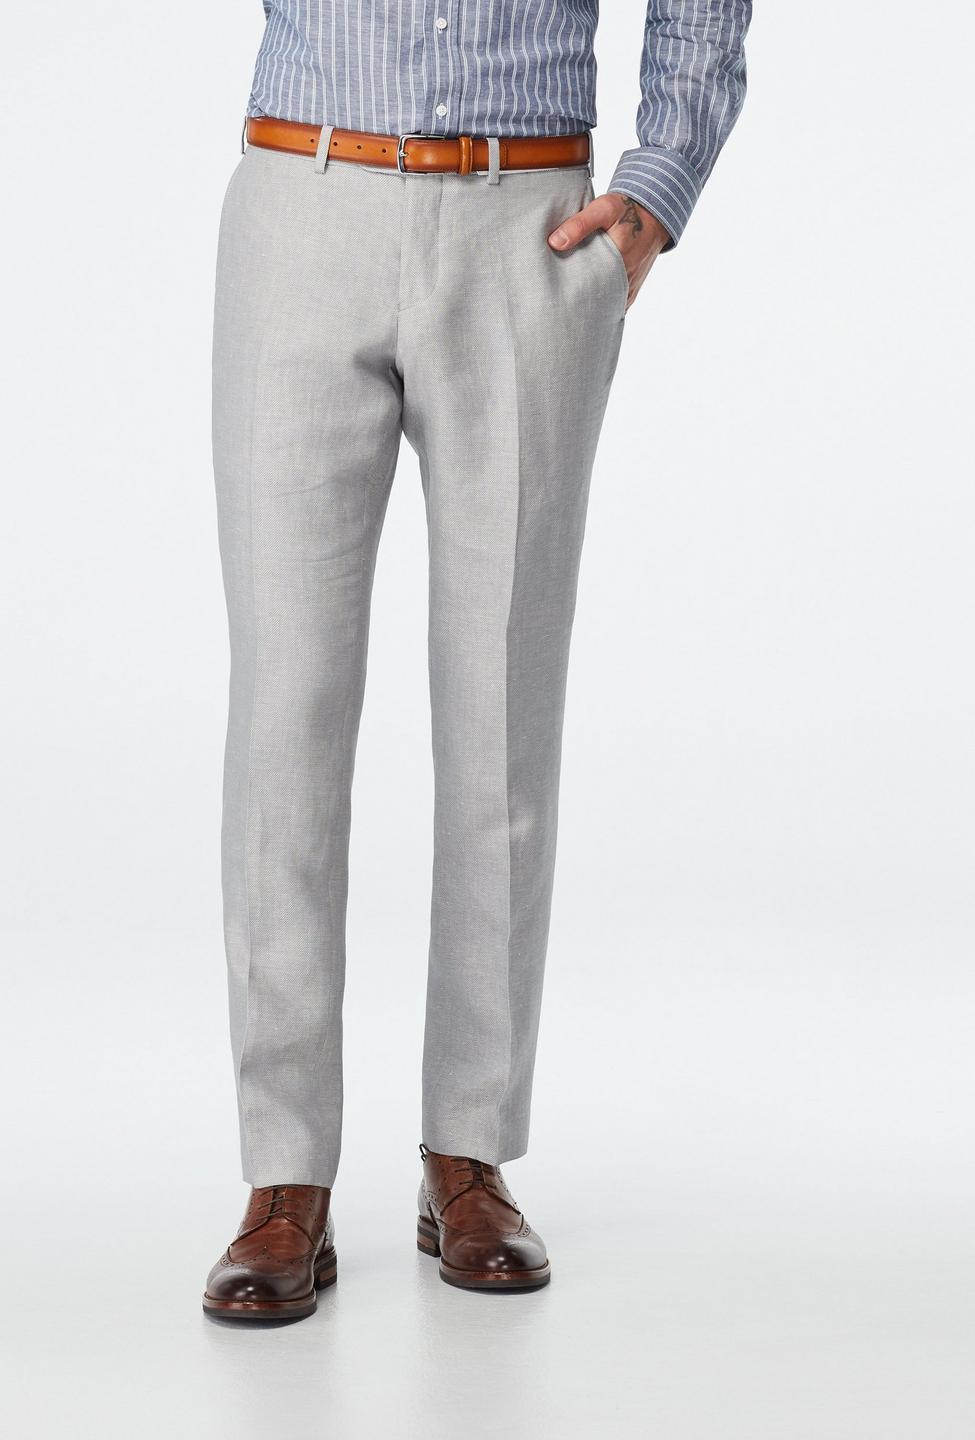 Gray pants - Sailsbury Solid Design from Seasonal Indochino Collection